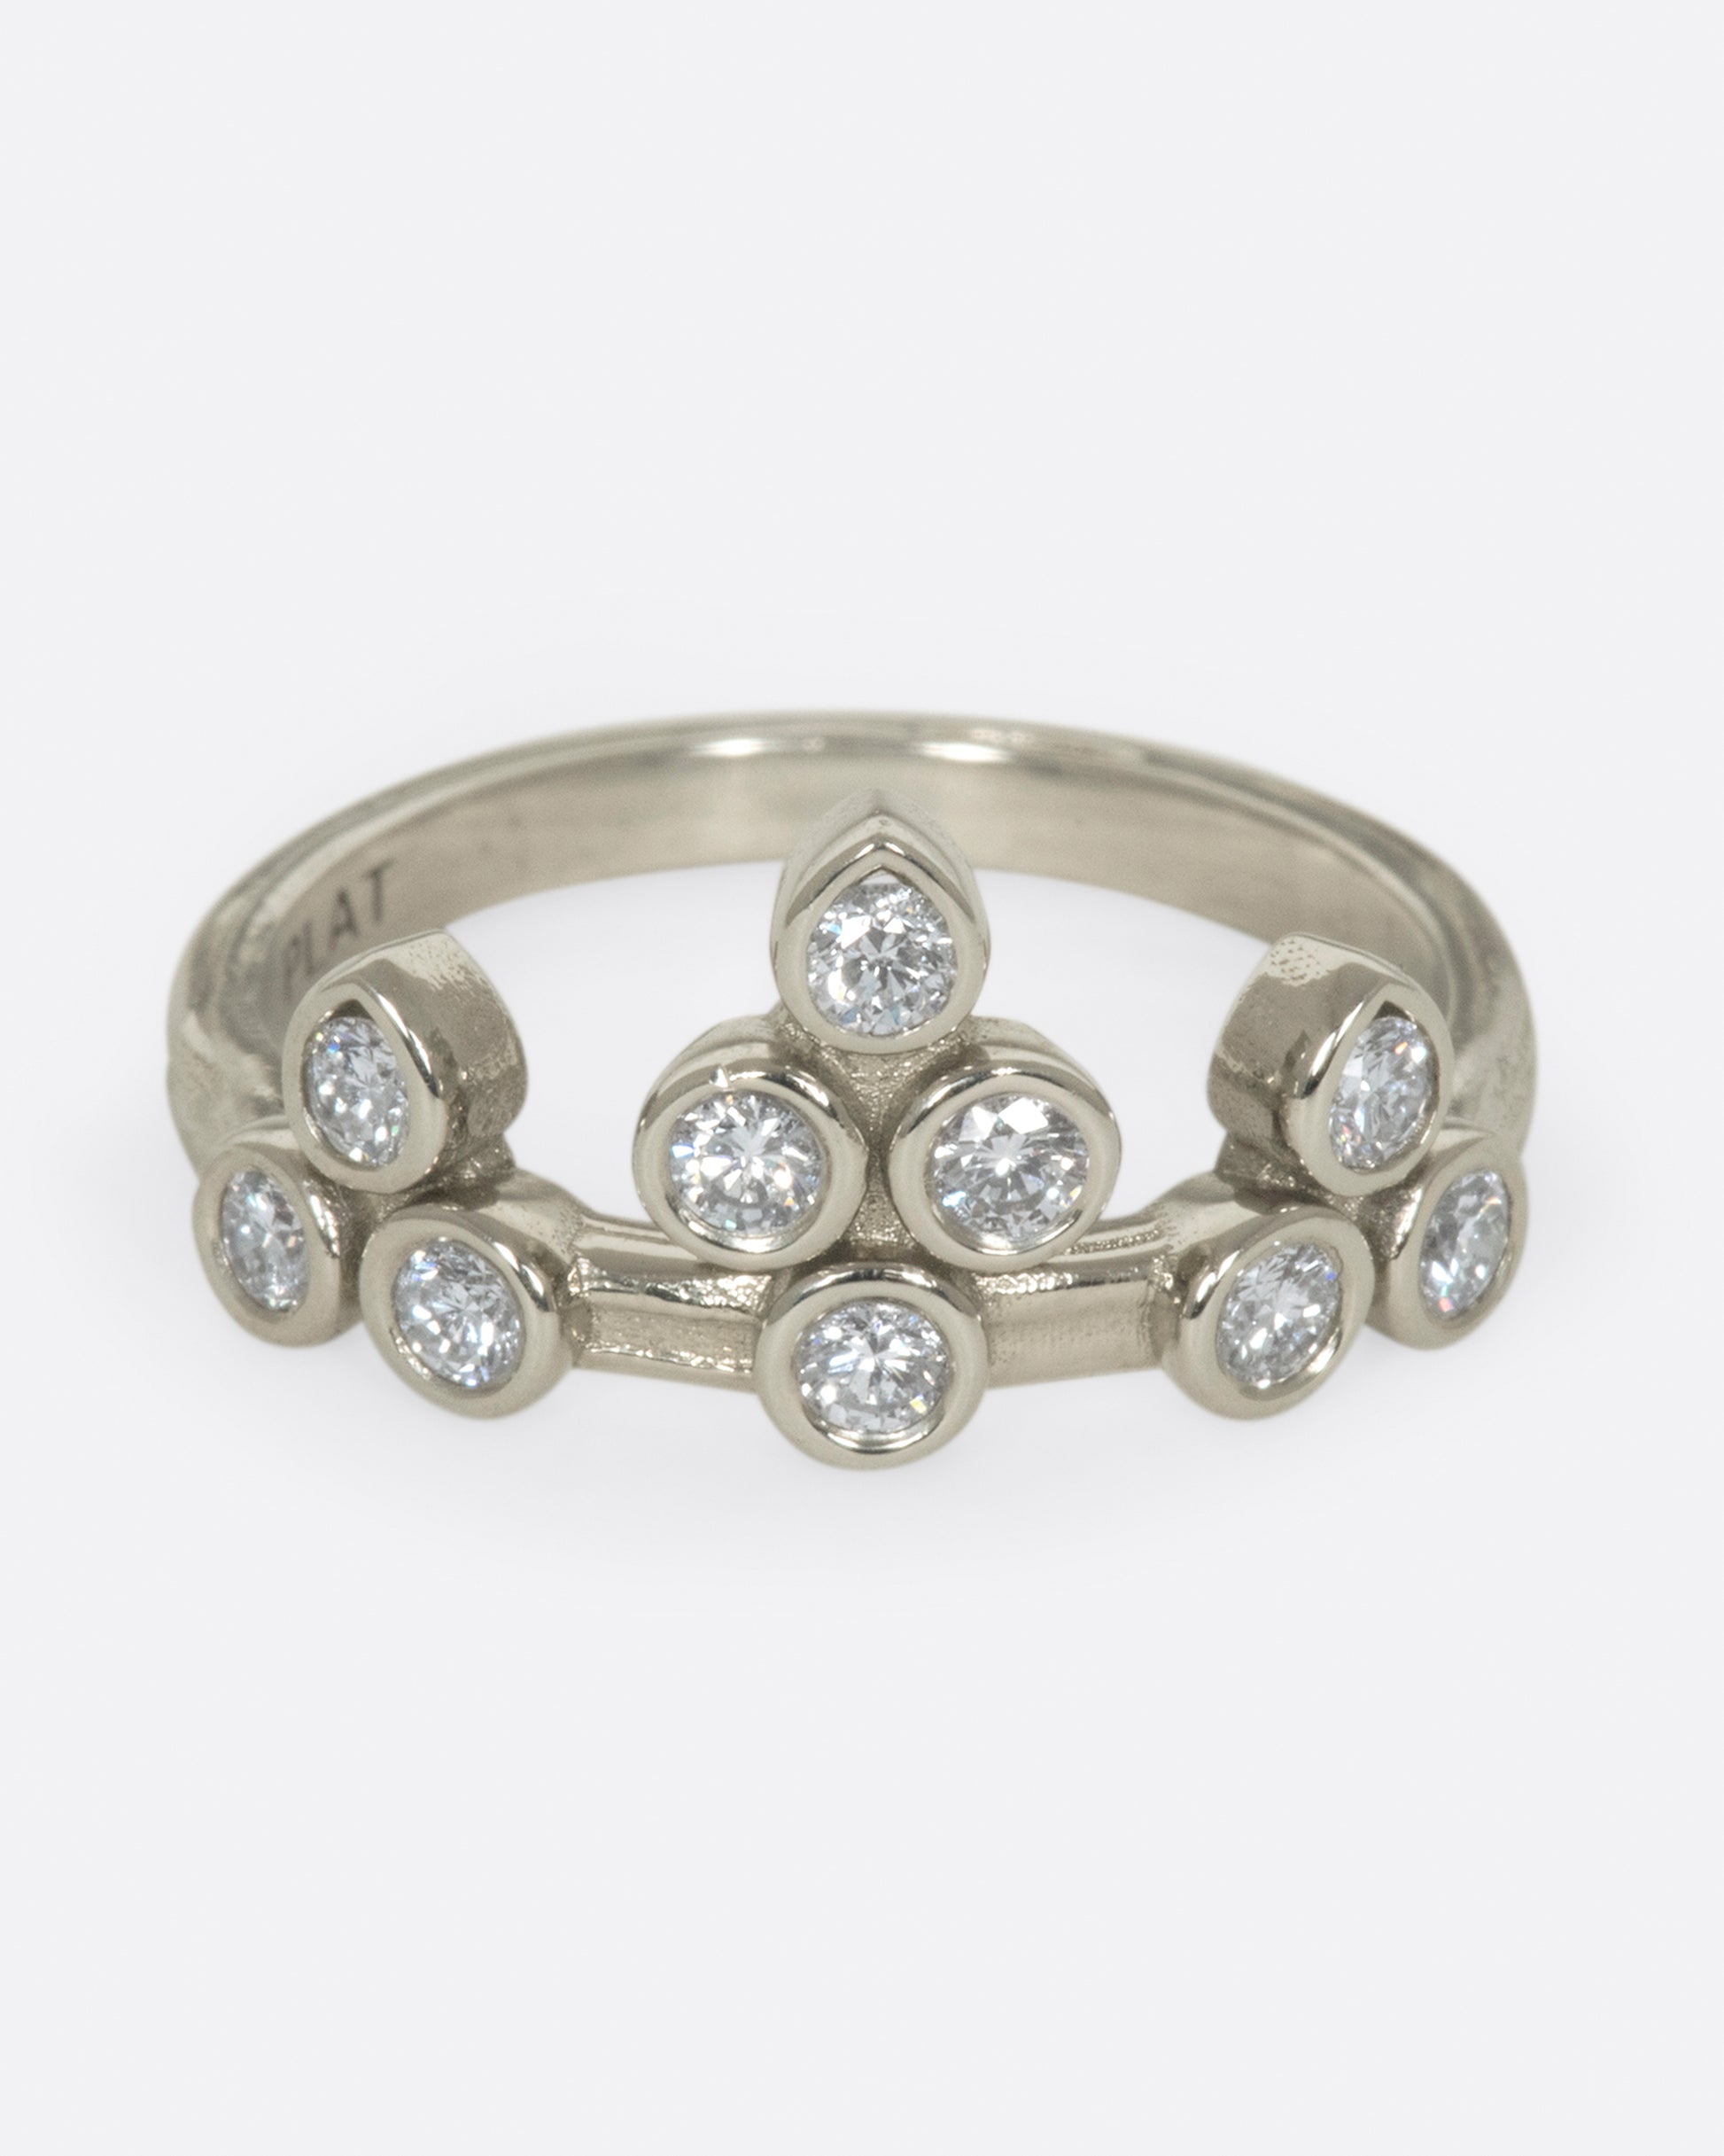 A tiara-like ring formed by 10 bezel-set round diamonds; wear it alone or stacked, and in either direction on the finger. 